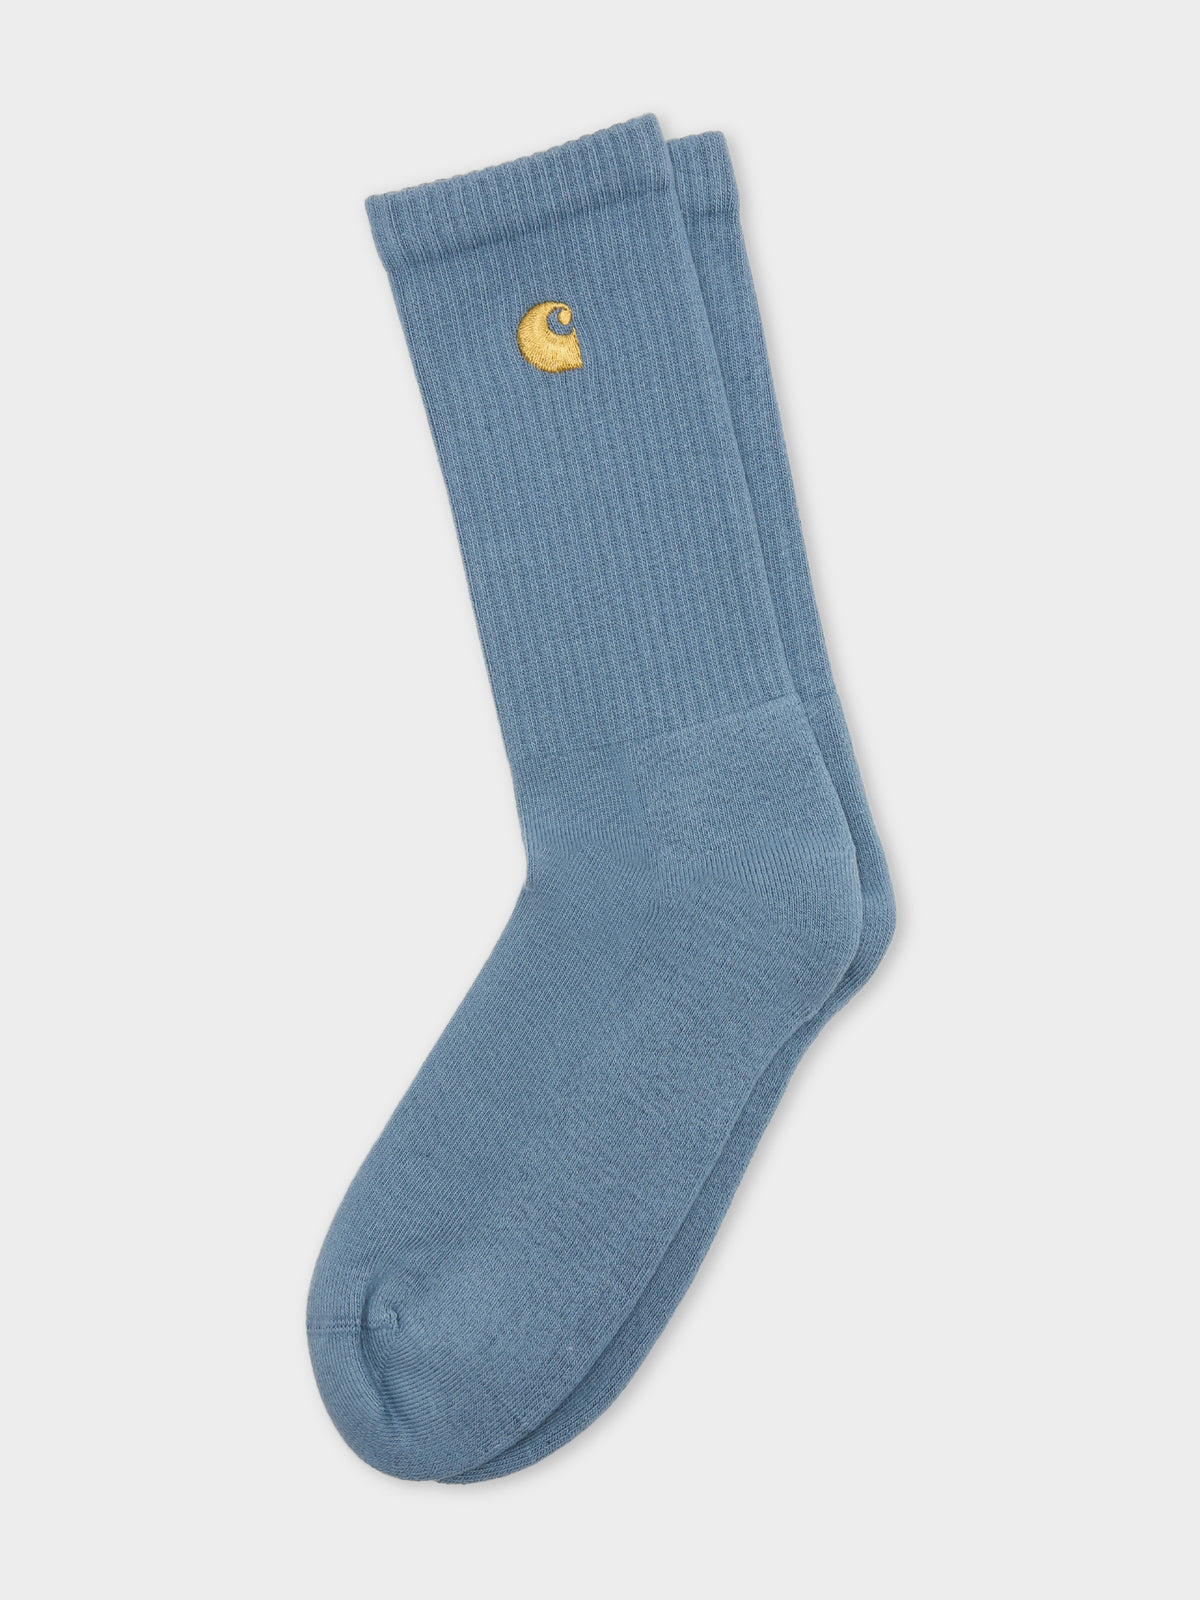 1 Pair of Chase Socks in Icy Water Blue